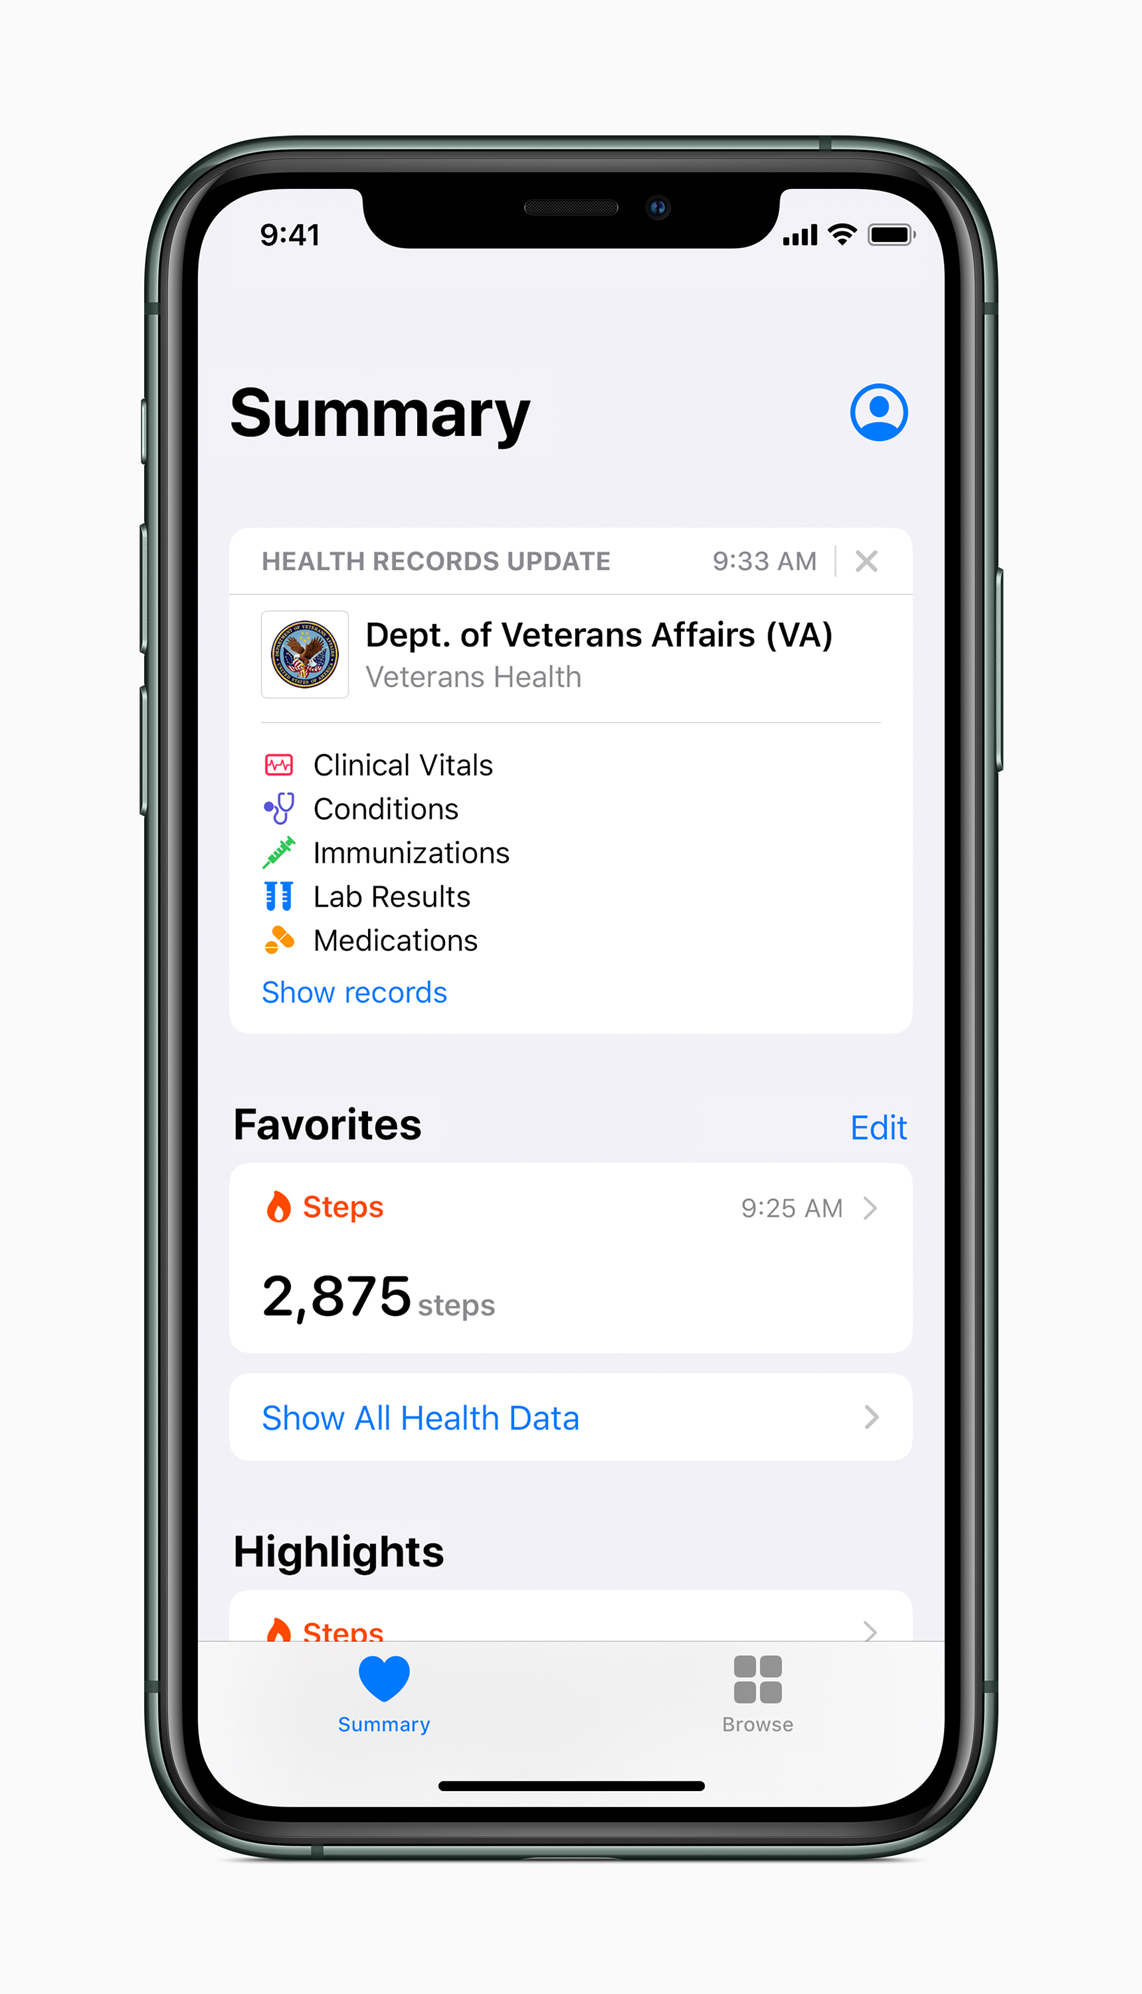 Health Records on iPhone now available to veterans across the U.S.